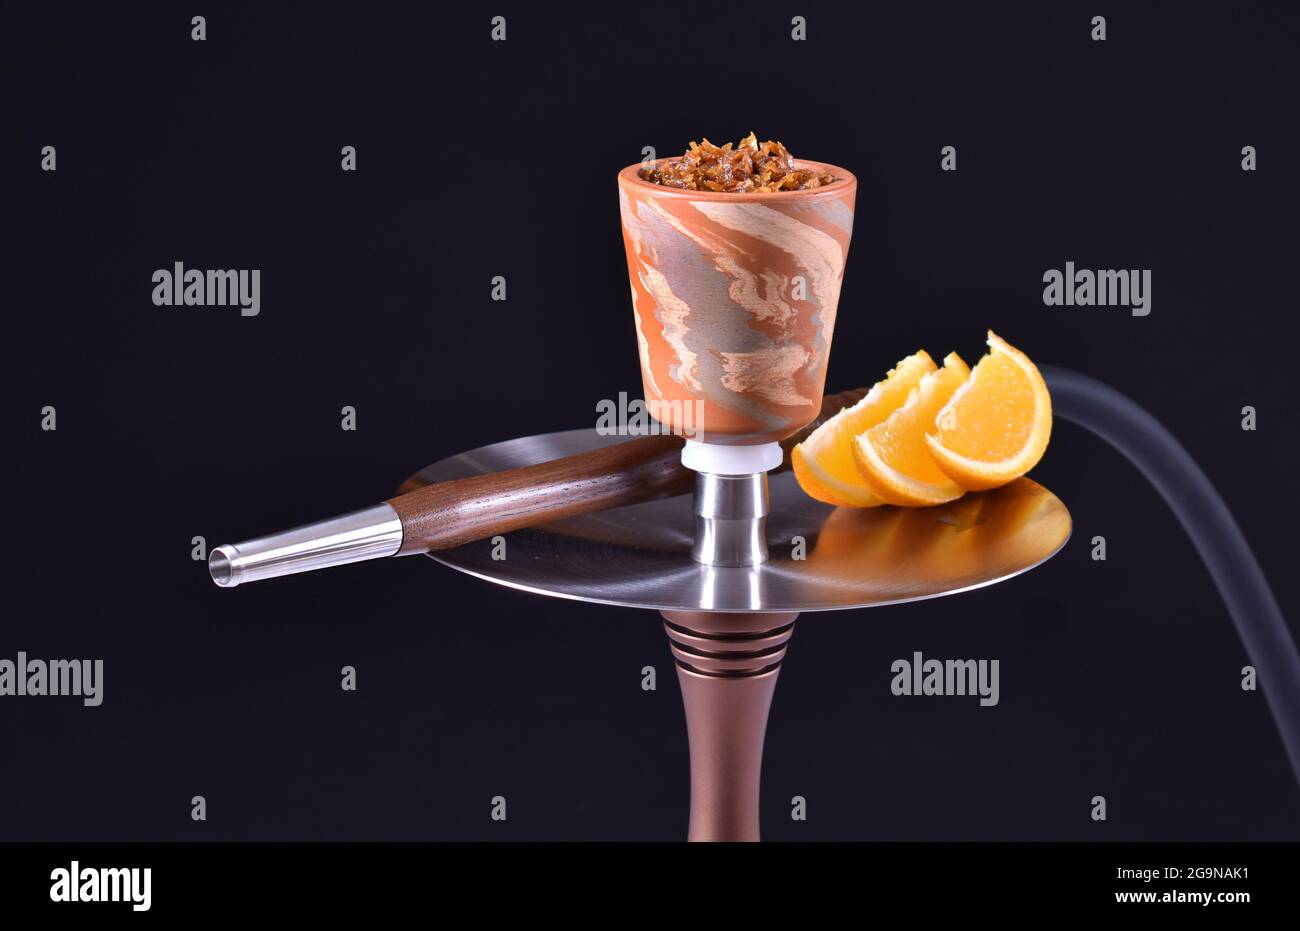 hookah bowl with tobacco on an black background with orange Stock Photo